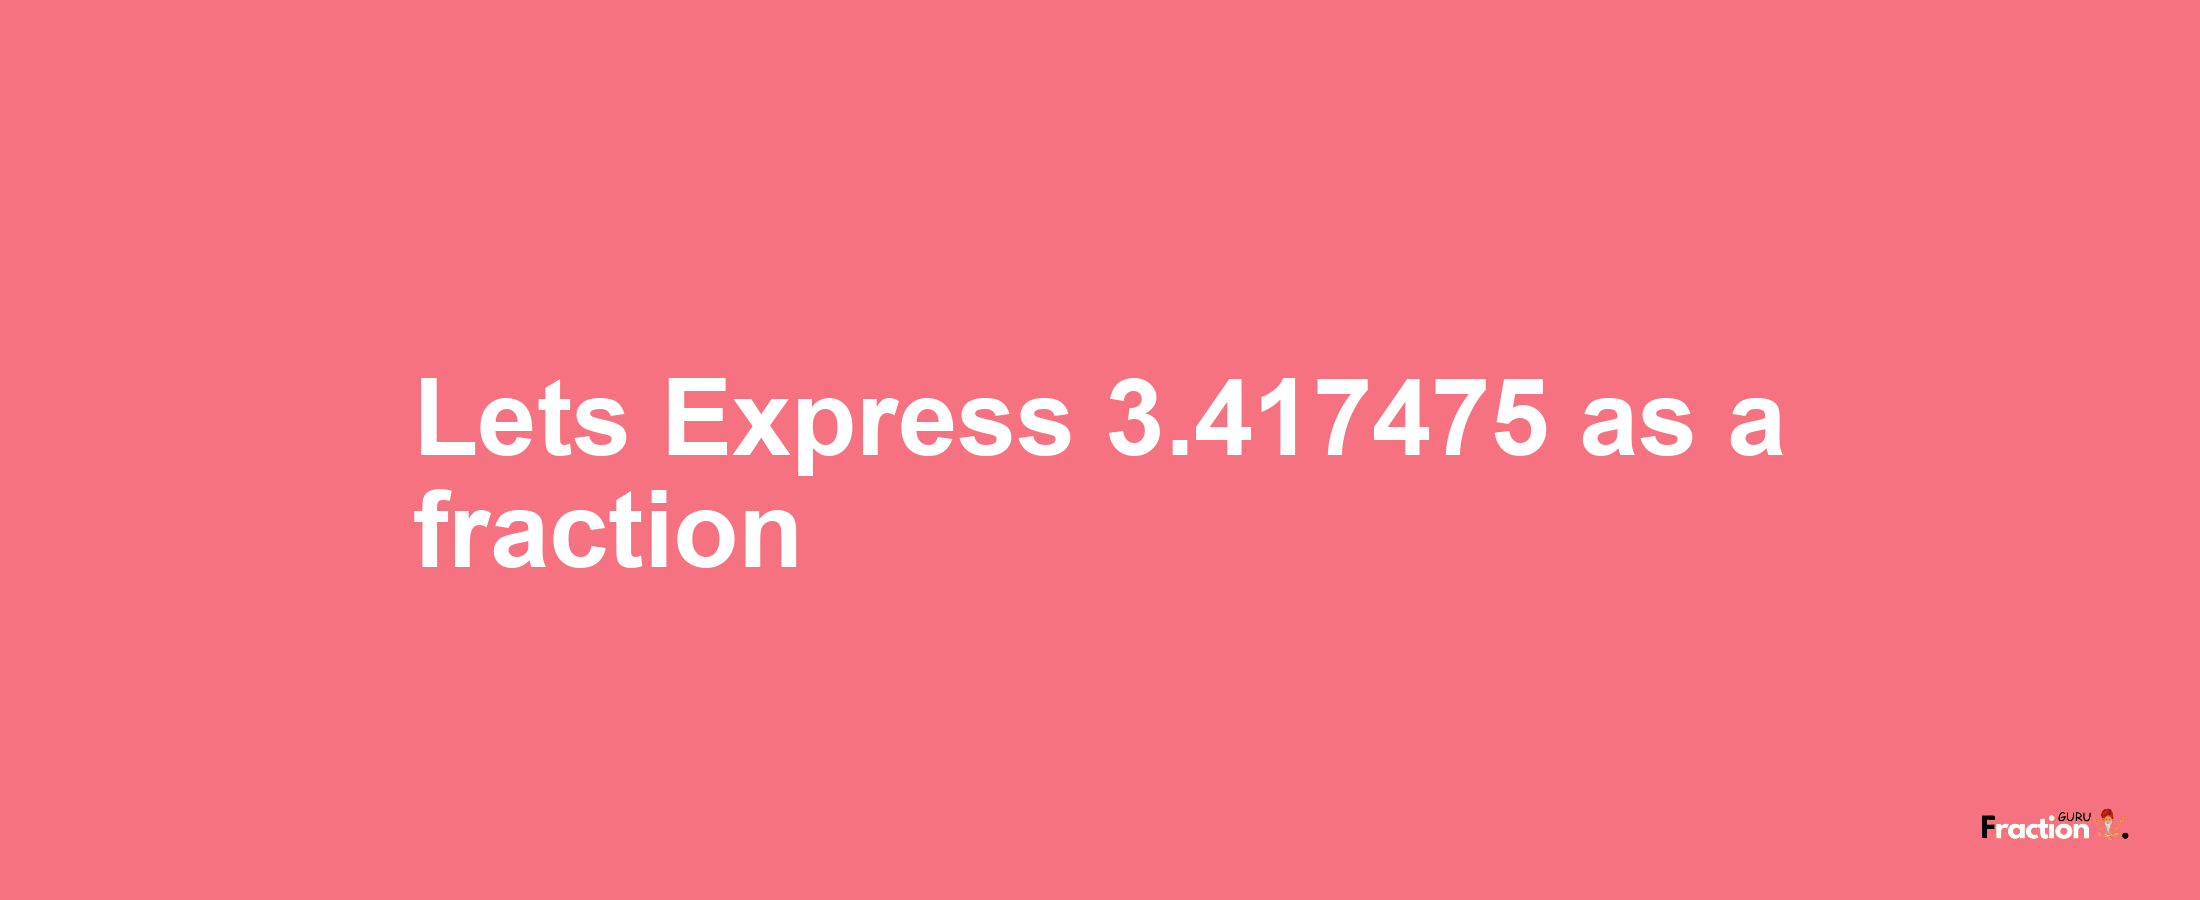 Lets Express 3.417475 as afraction